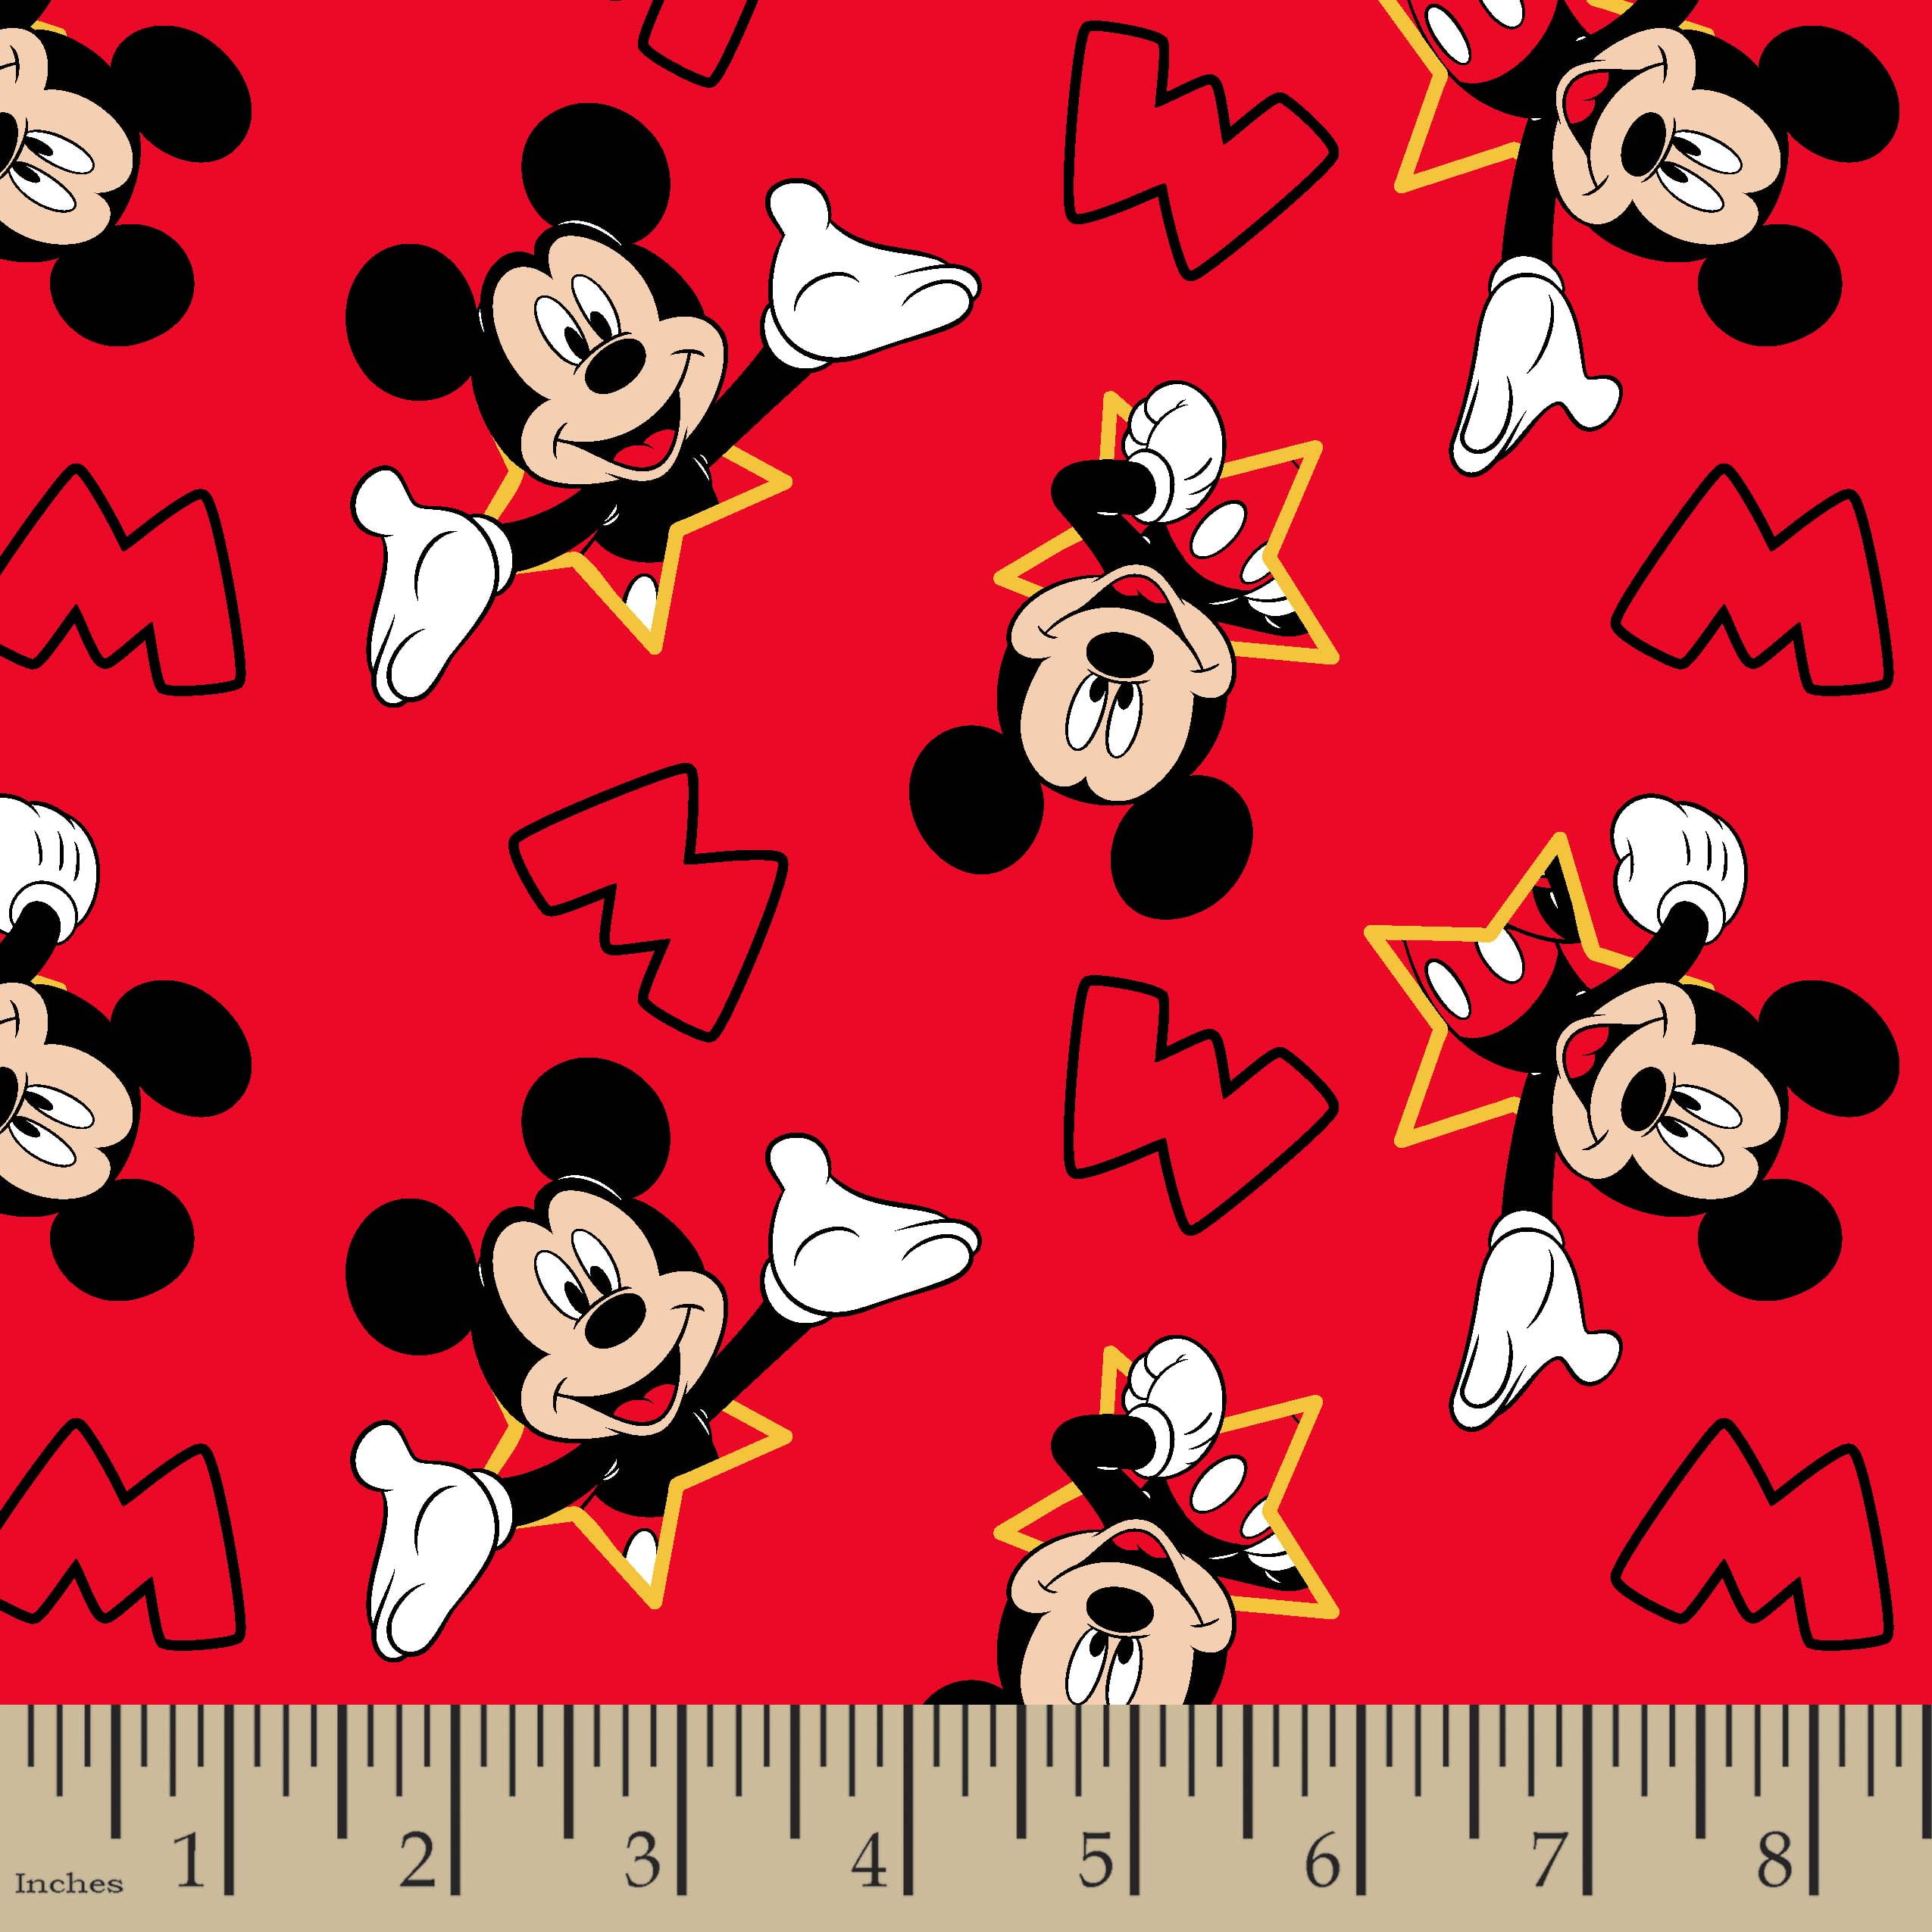 Disney Fabric Mickey Mouse Red, Blue White - Sold by the Yard